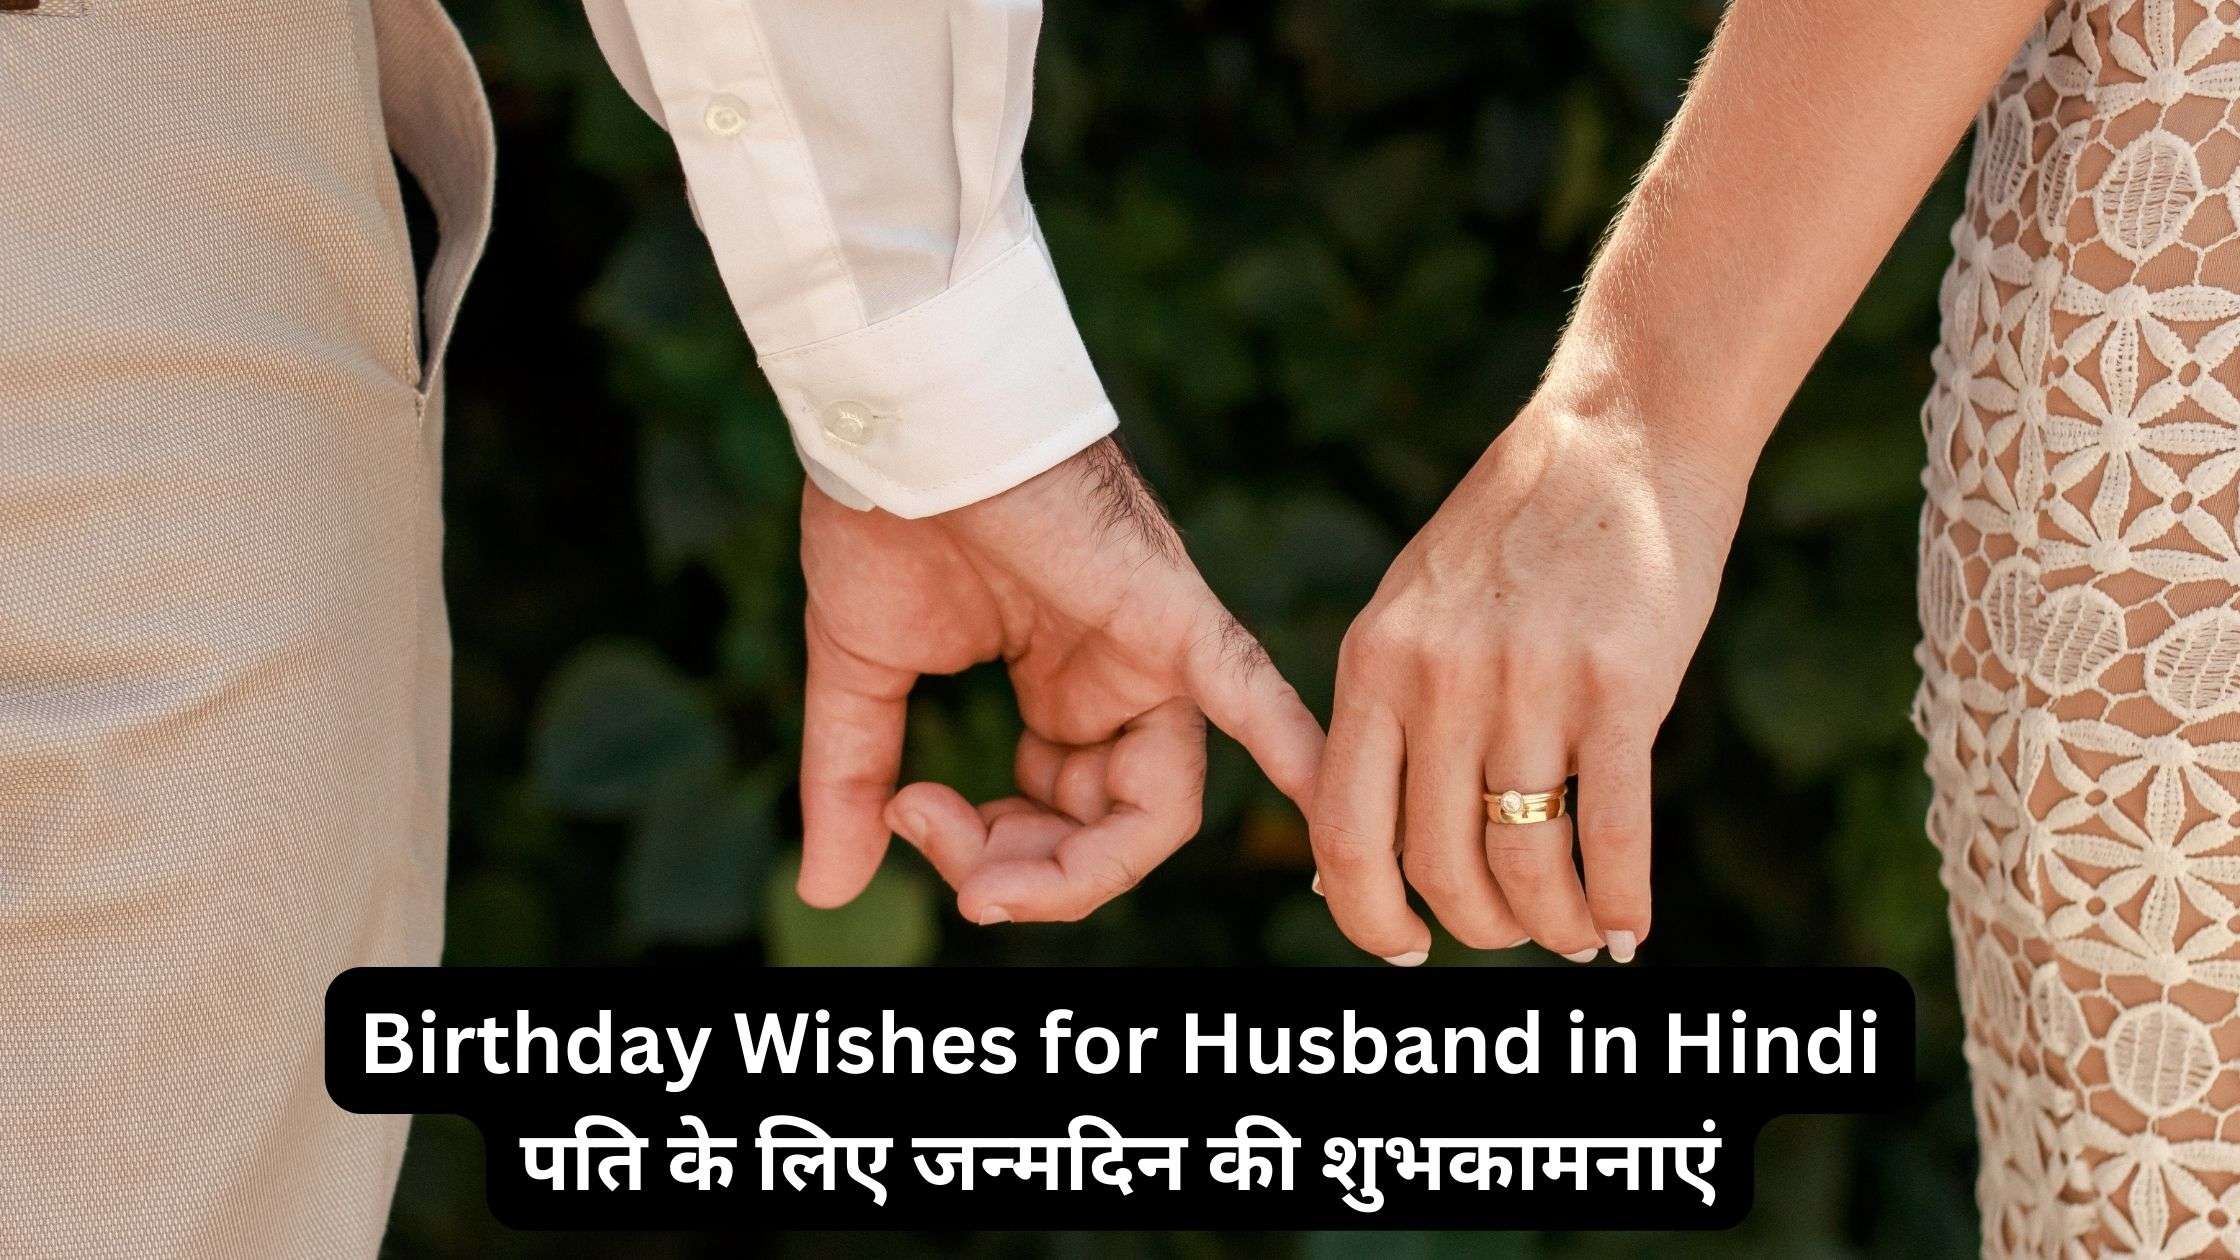 You are currently viewing Birthday Wishes for Husband in Hindi | पति के लिए जन्मदिन की शुभकामनाएं